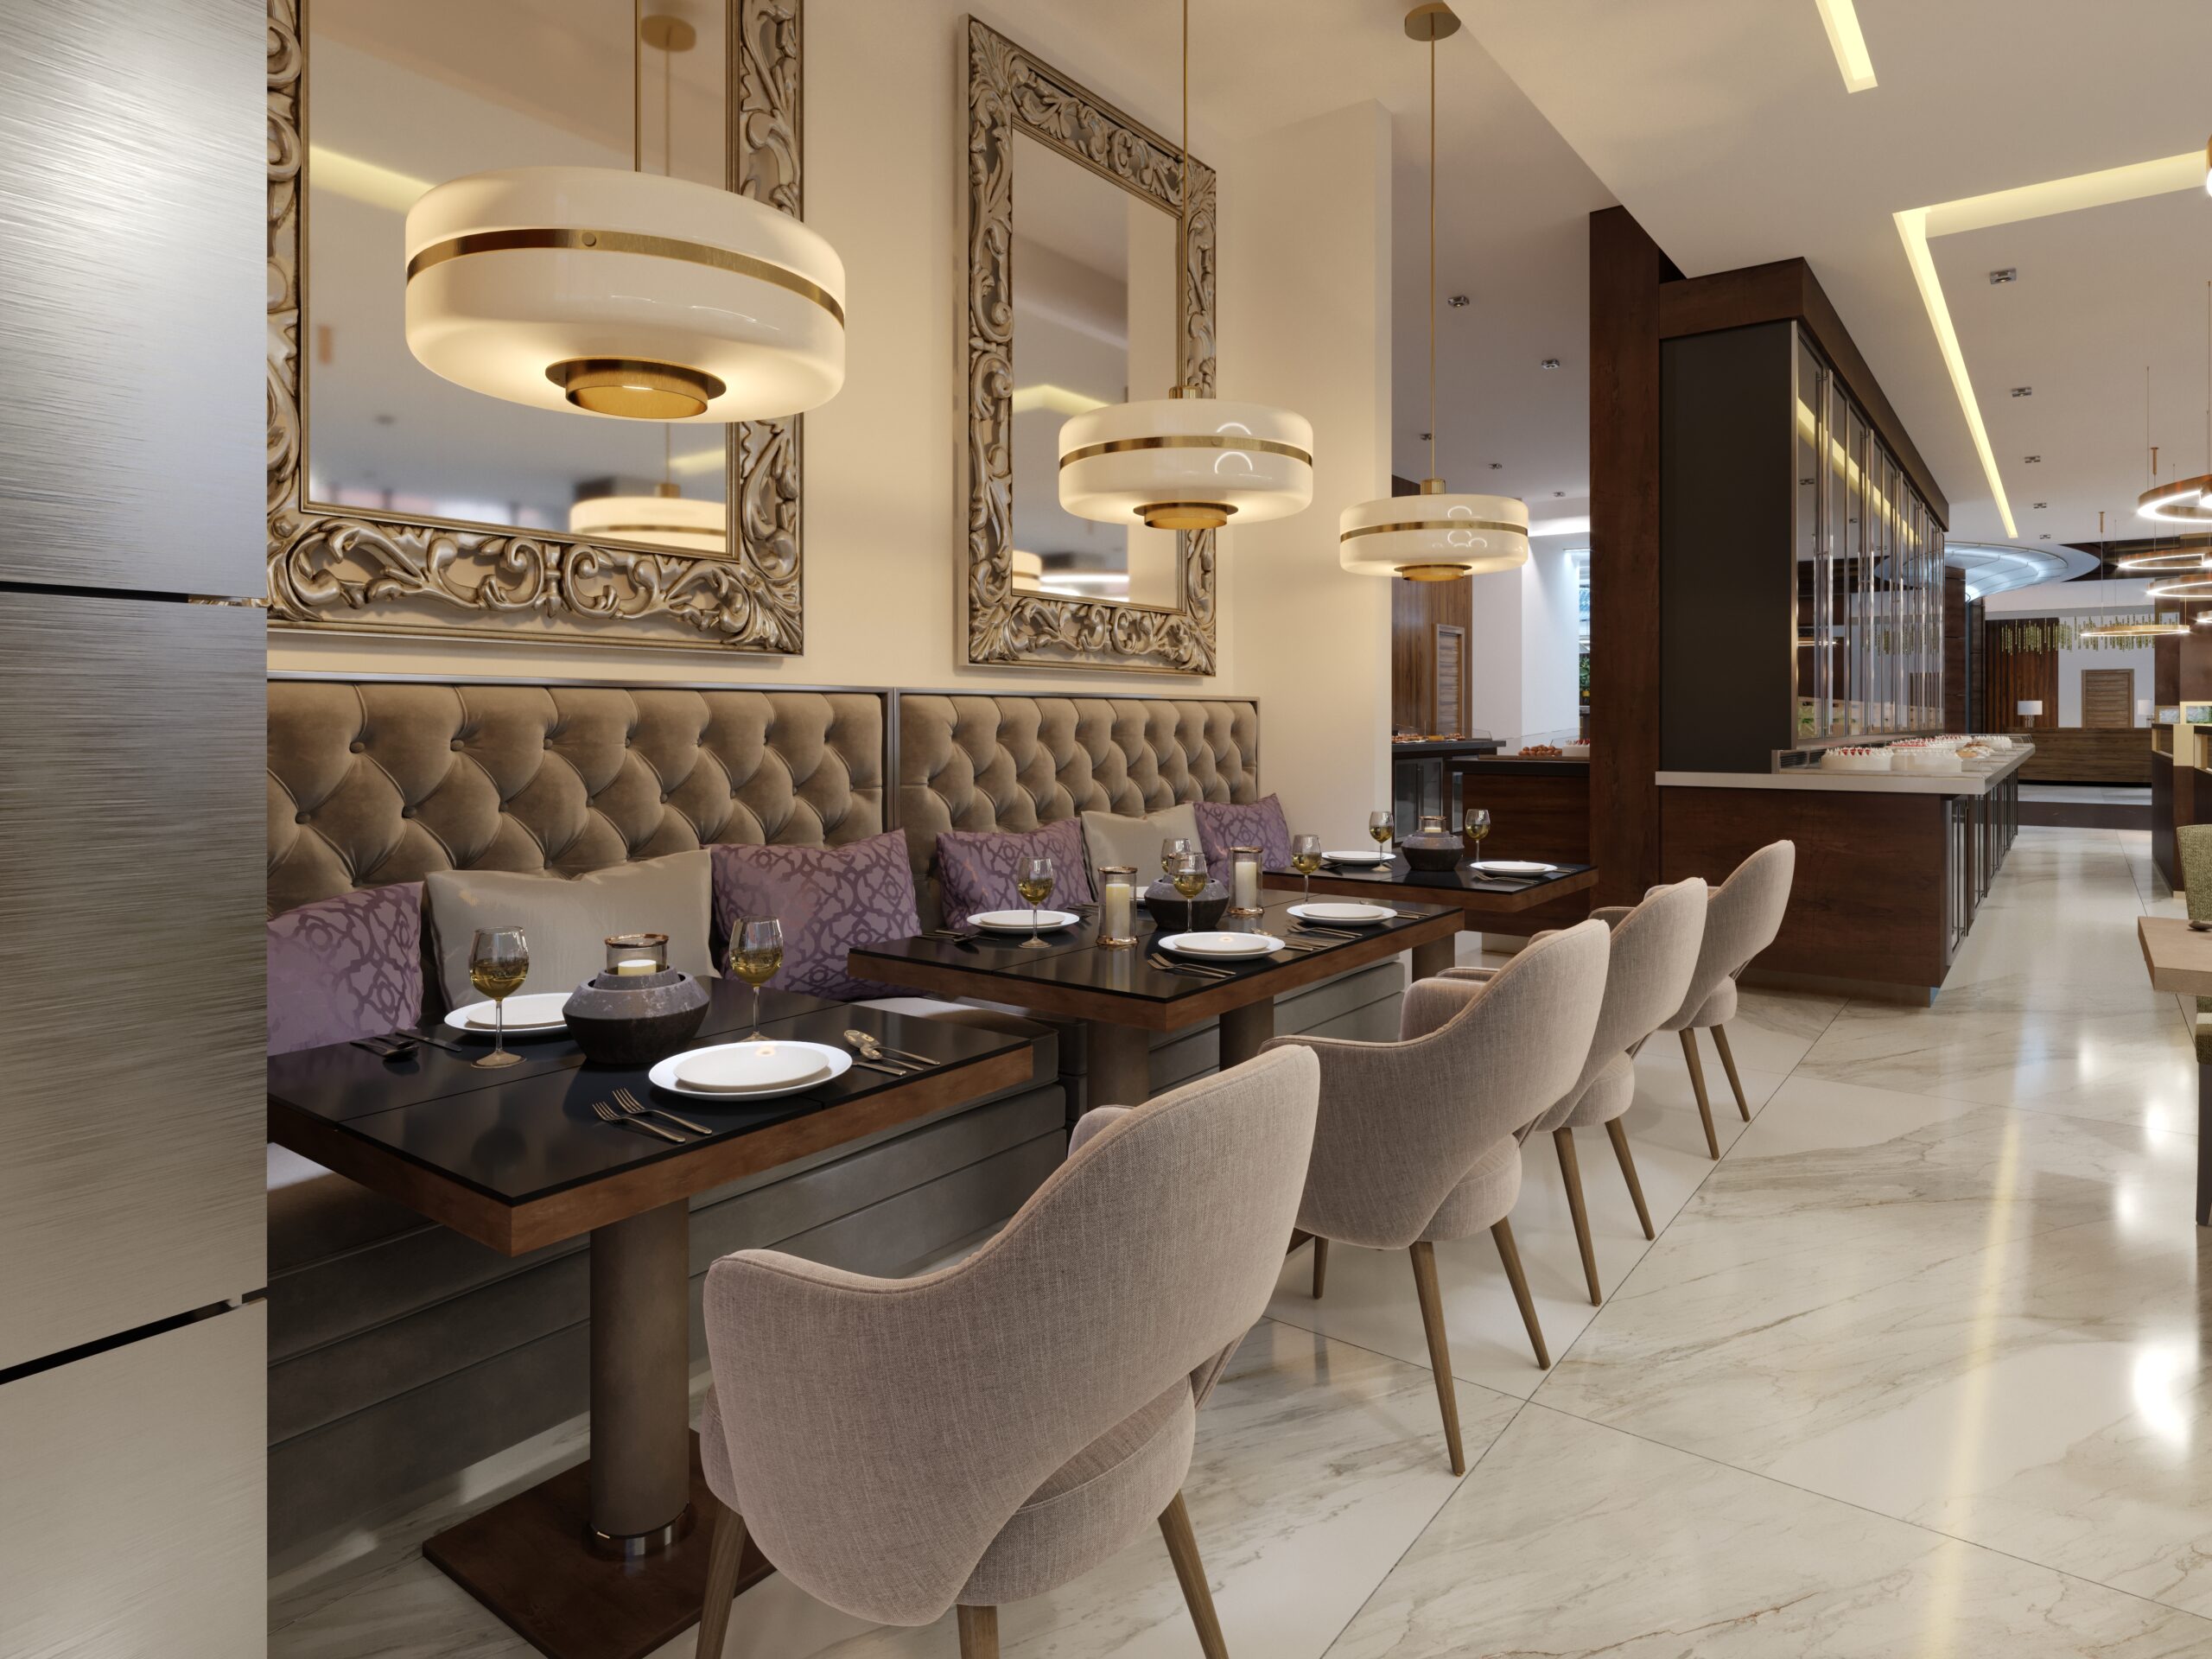 Restaurant in a modern style with marble floor. There are sofas chairs with tables, decorative stainless columns. On ceiling big chandelier with gold circles. Large closet with bottles and light. 3D Rendering